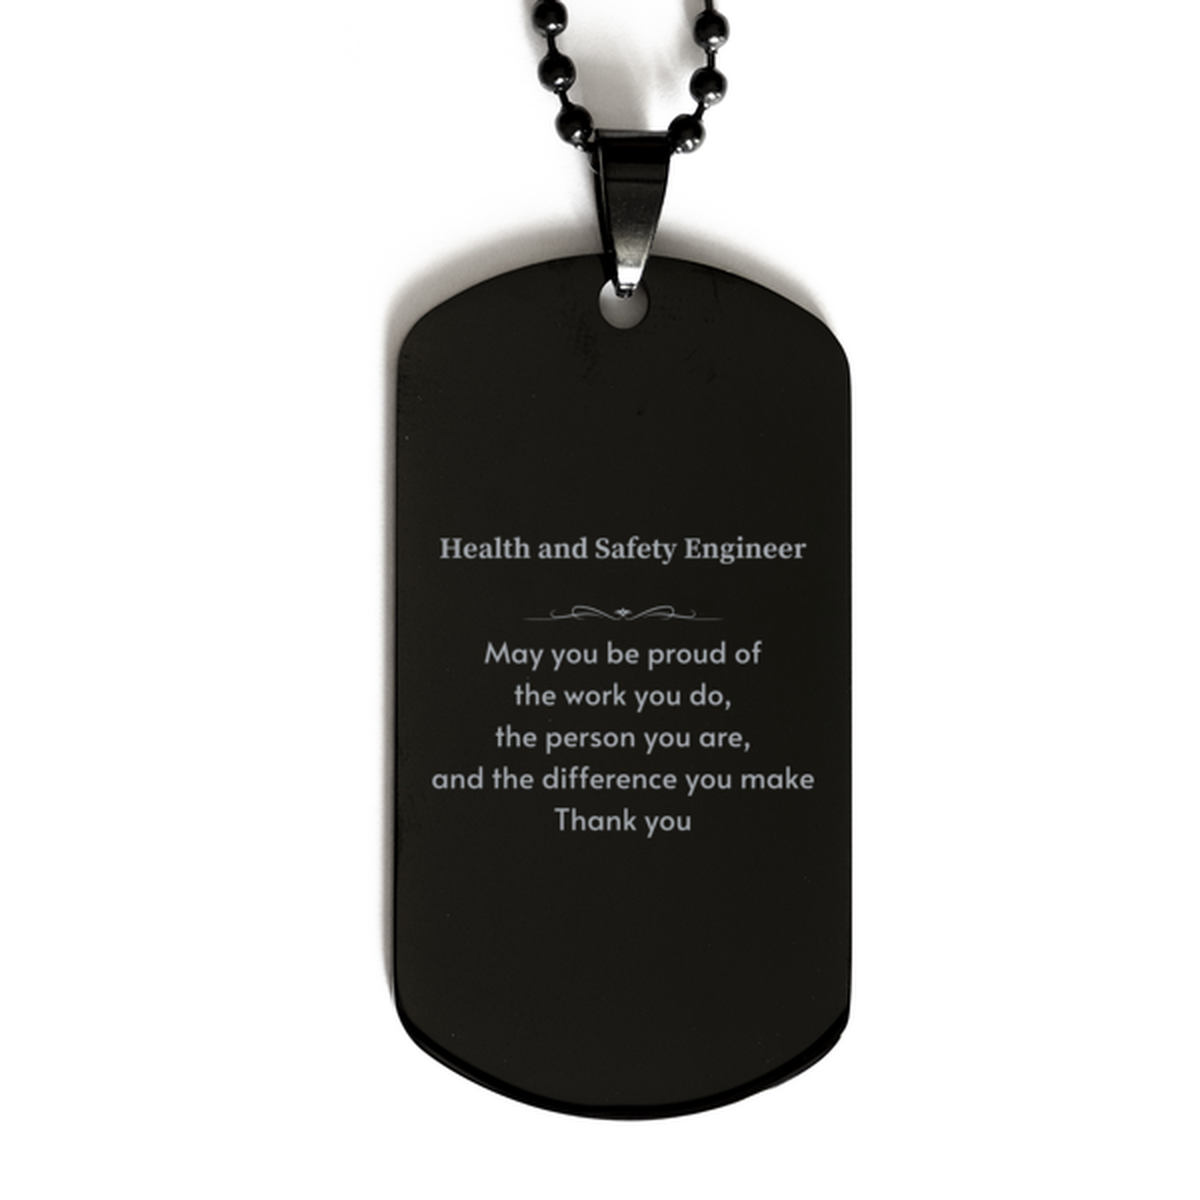 Heartwarming Black Dog Tag Retirement Coworkers Gifts for Health and Safety Engineer, Health and Safety Engineer May You be proud of the work you do, the person you are Gifts for Boss Men Women Friends